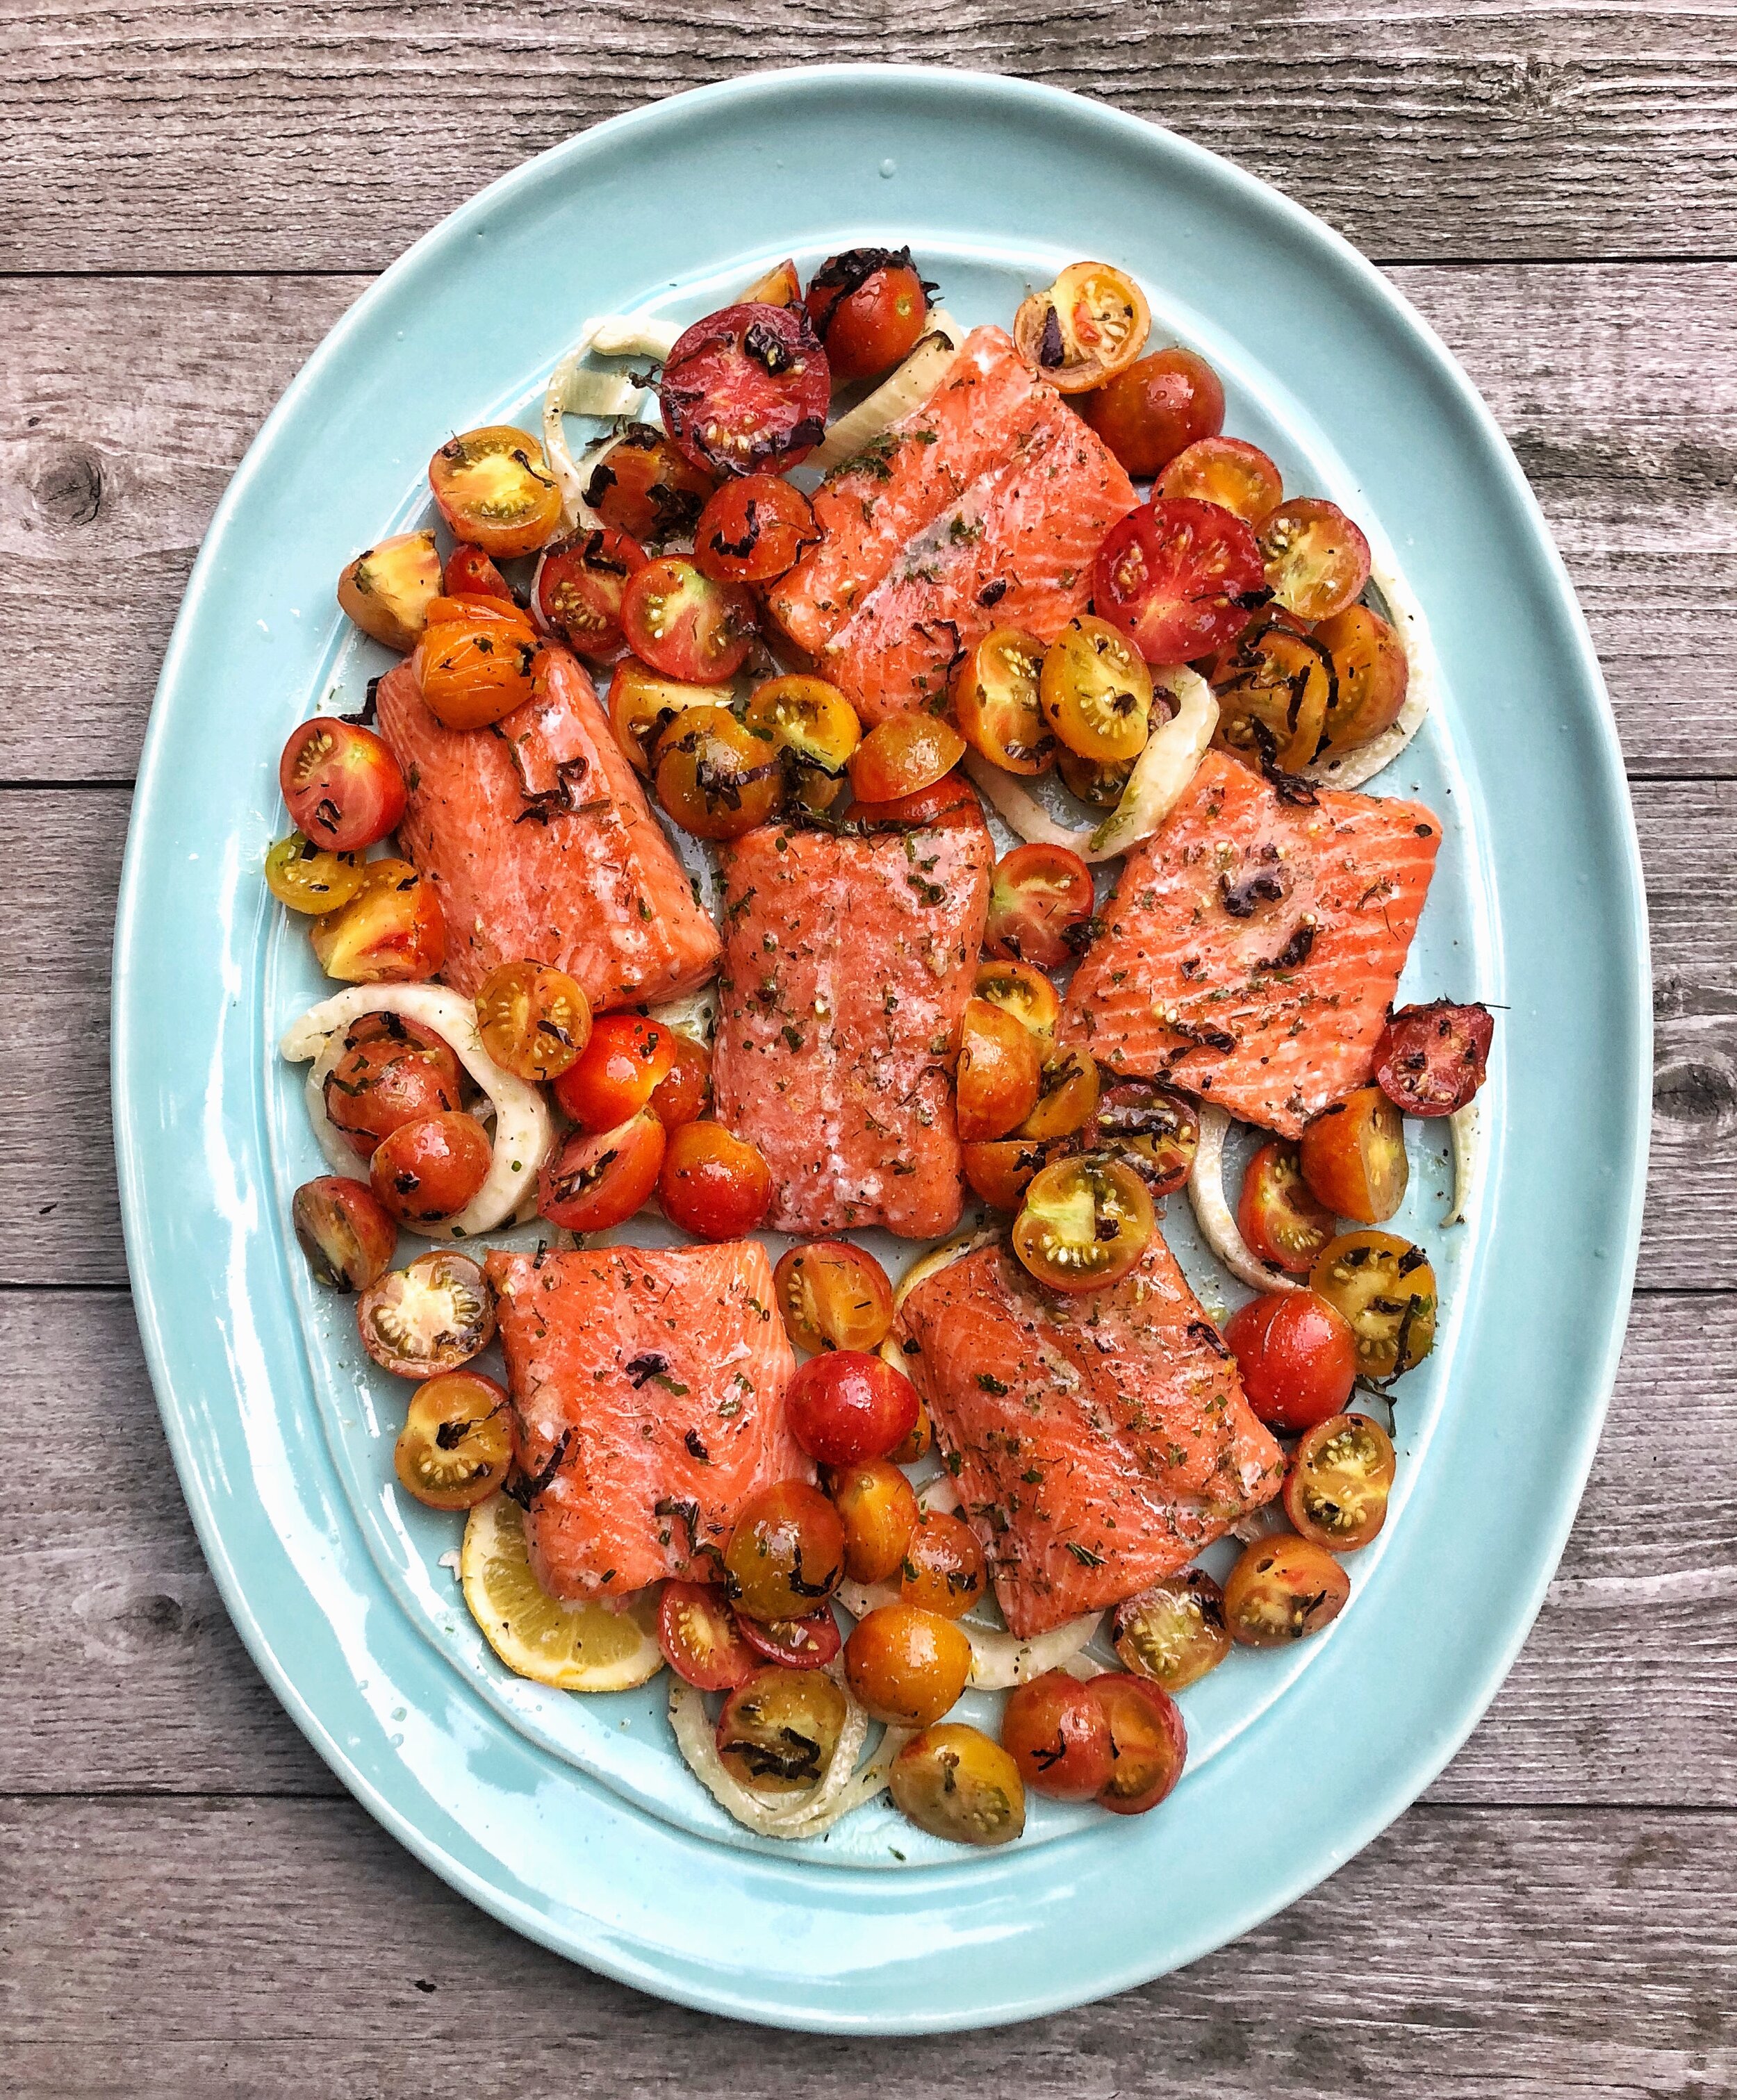 Wild salmon with a fennel and tomato salad and purple basil